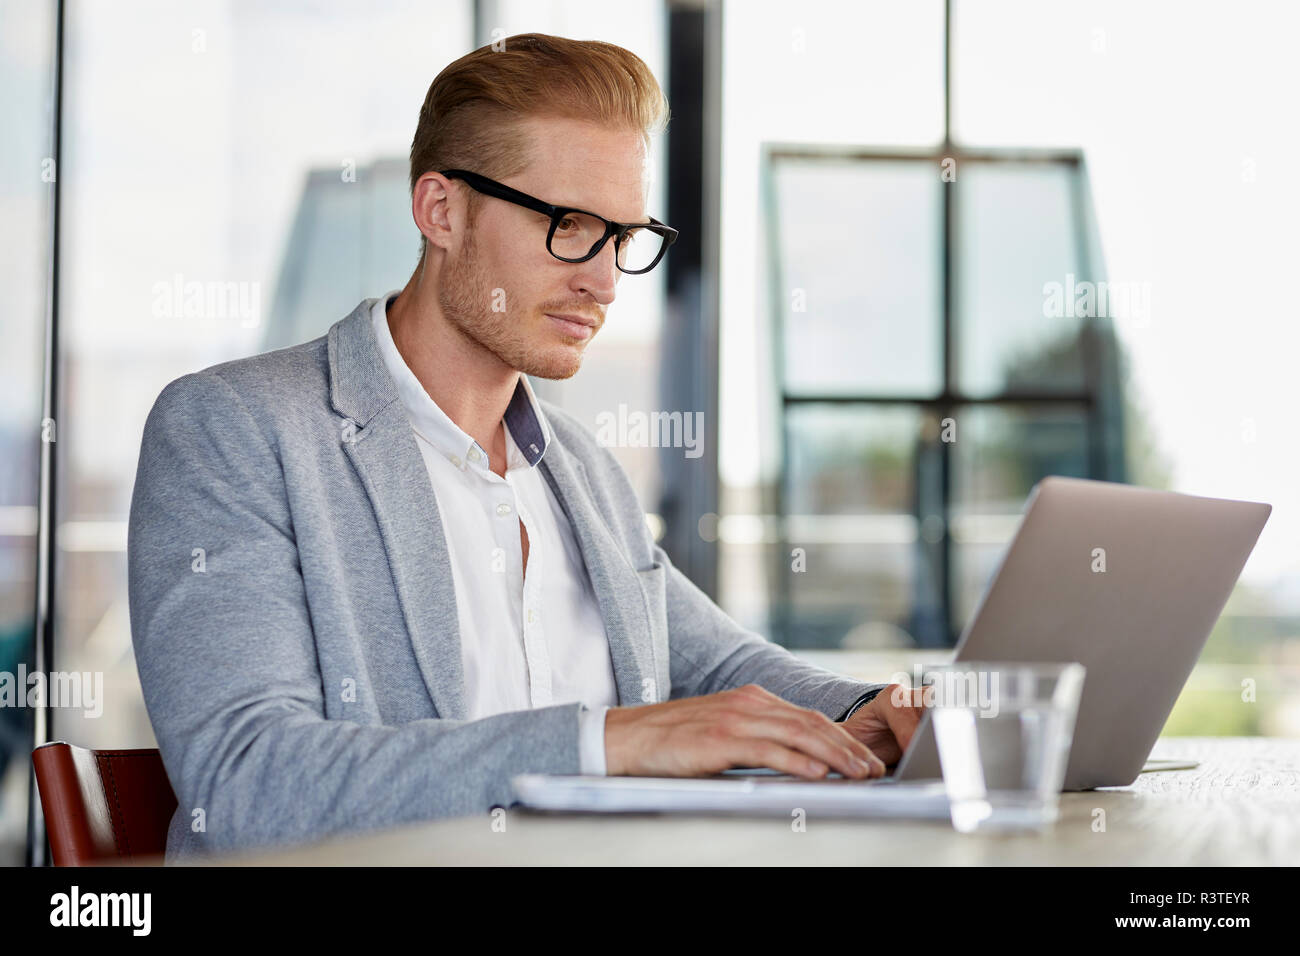 Businessman using laptop on desk in office Stock Photo